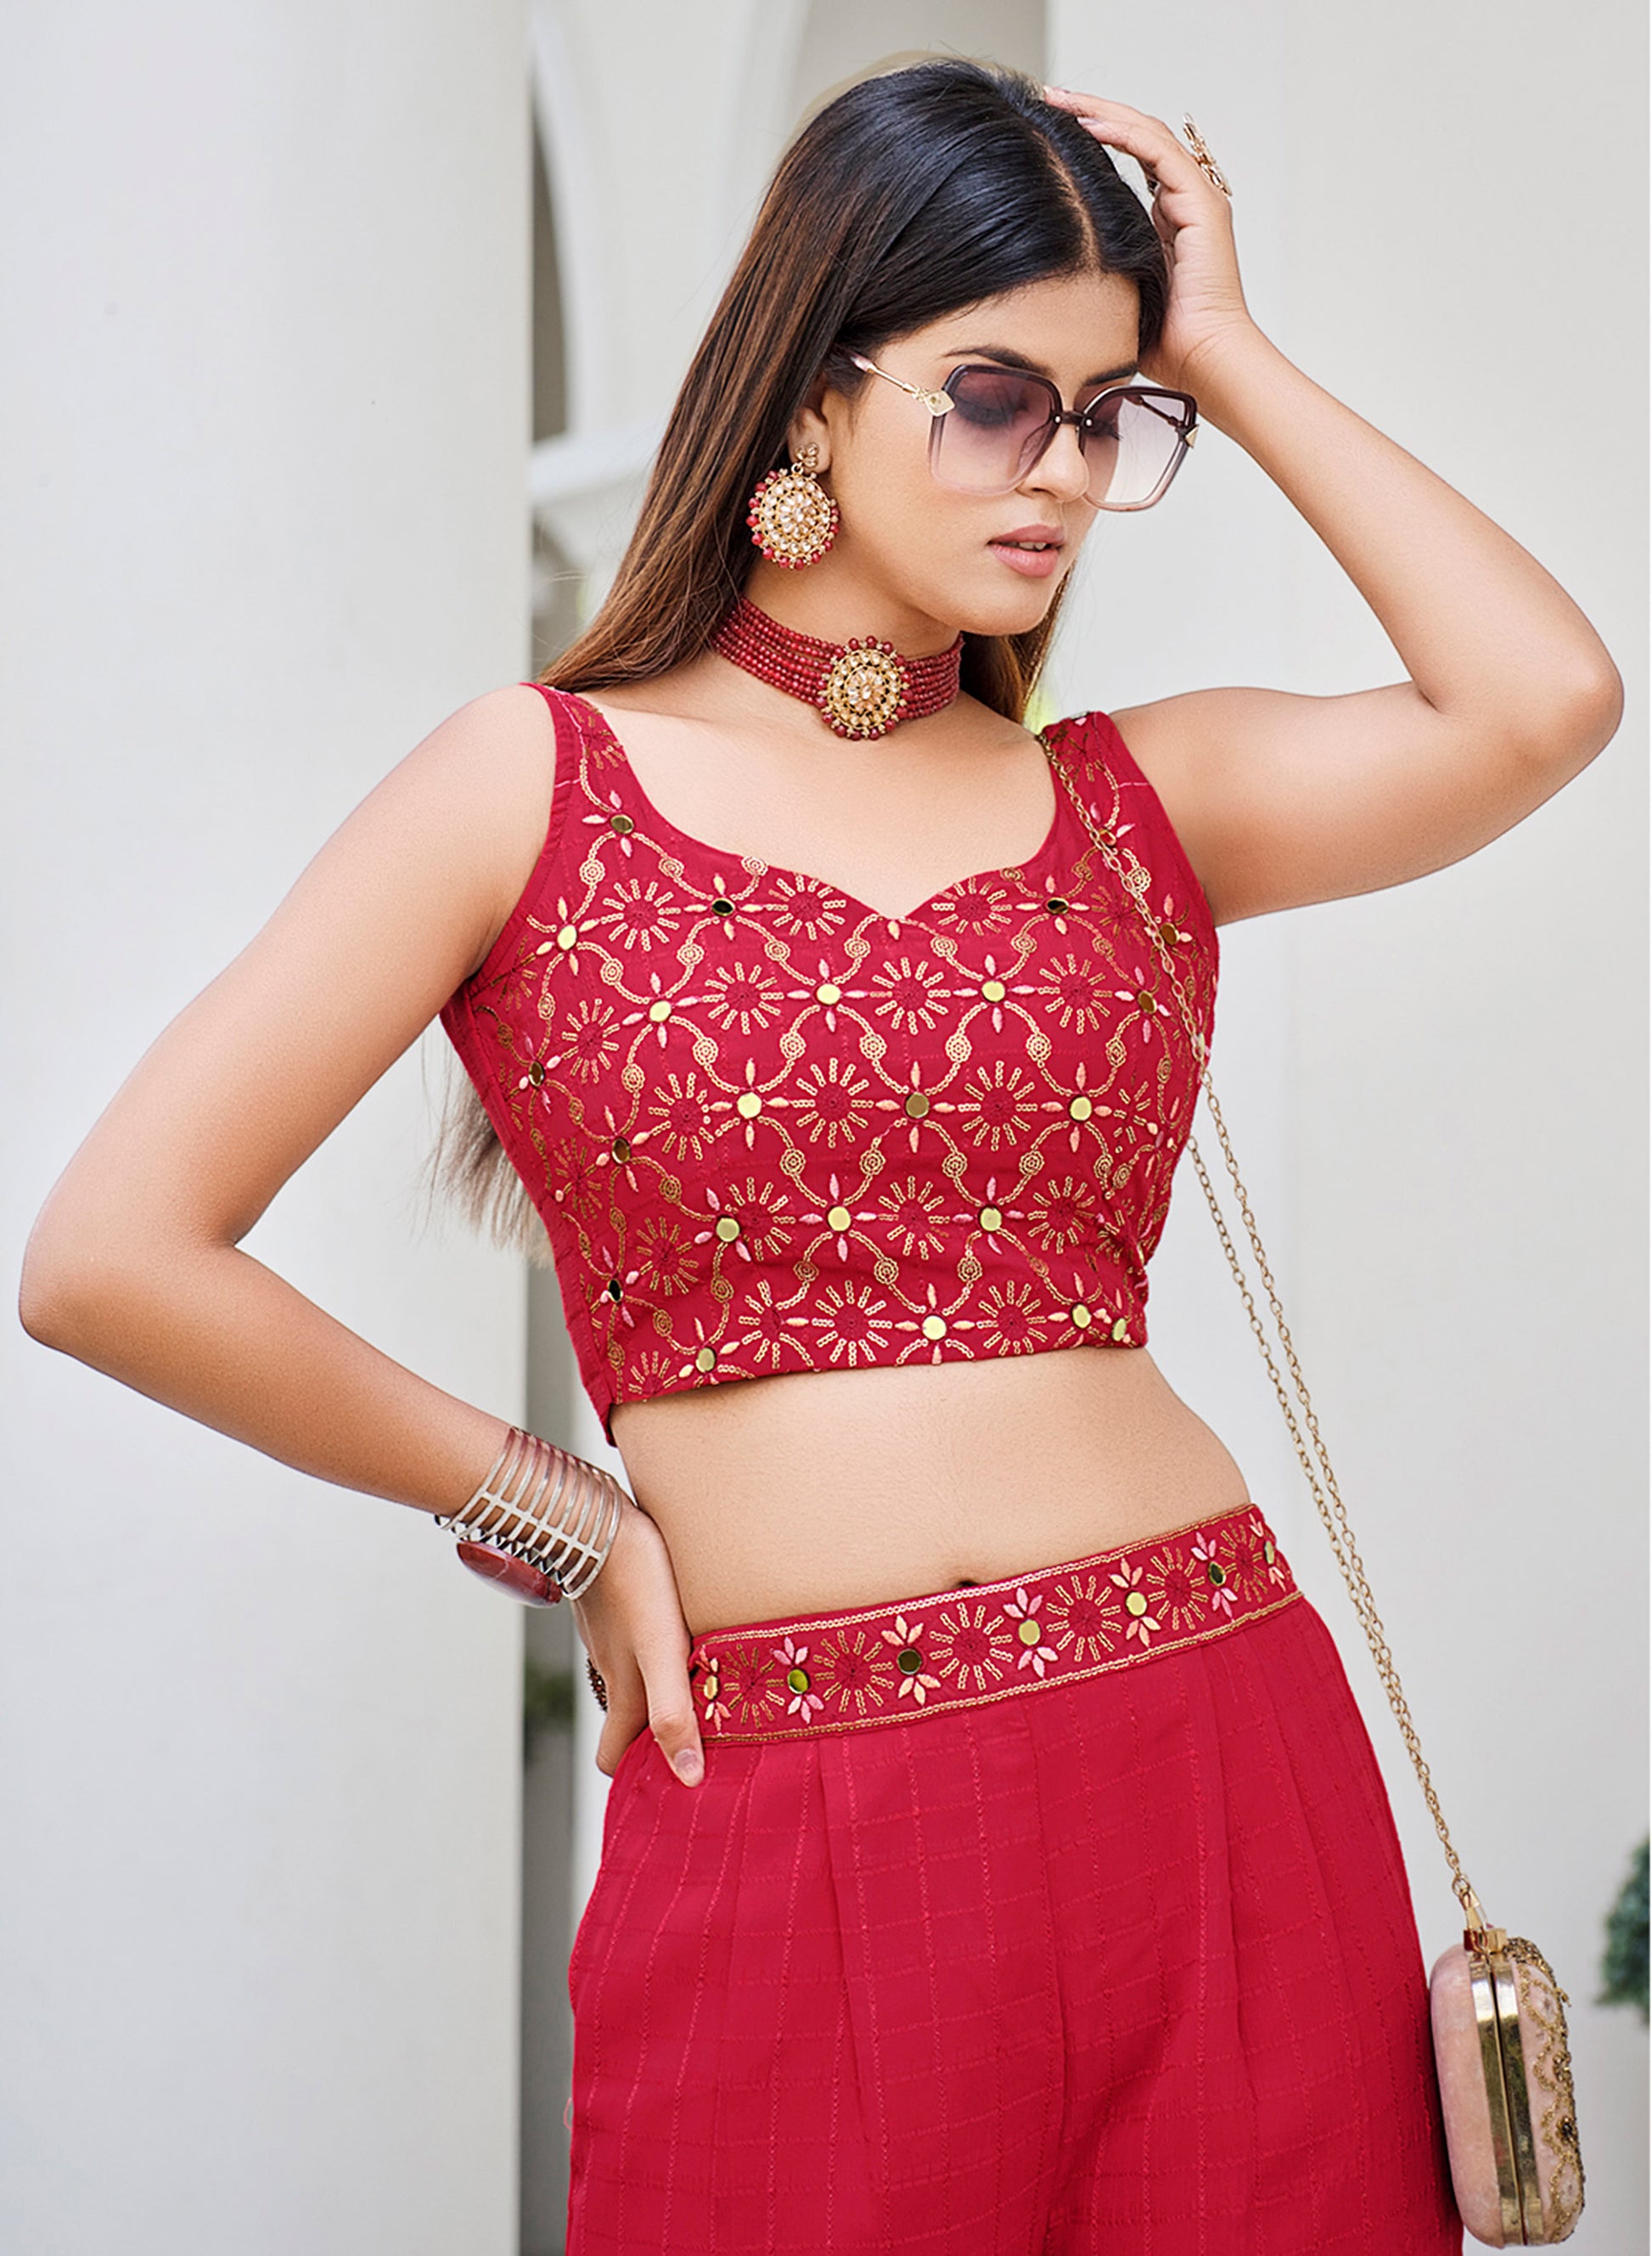 Red Color Mirror Embroidery Georgette Palazzo